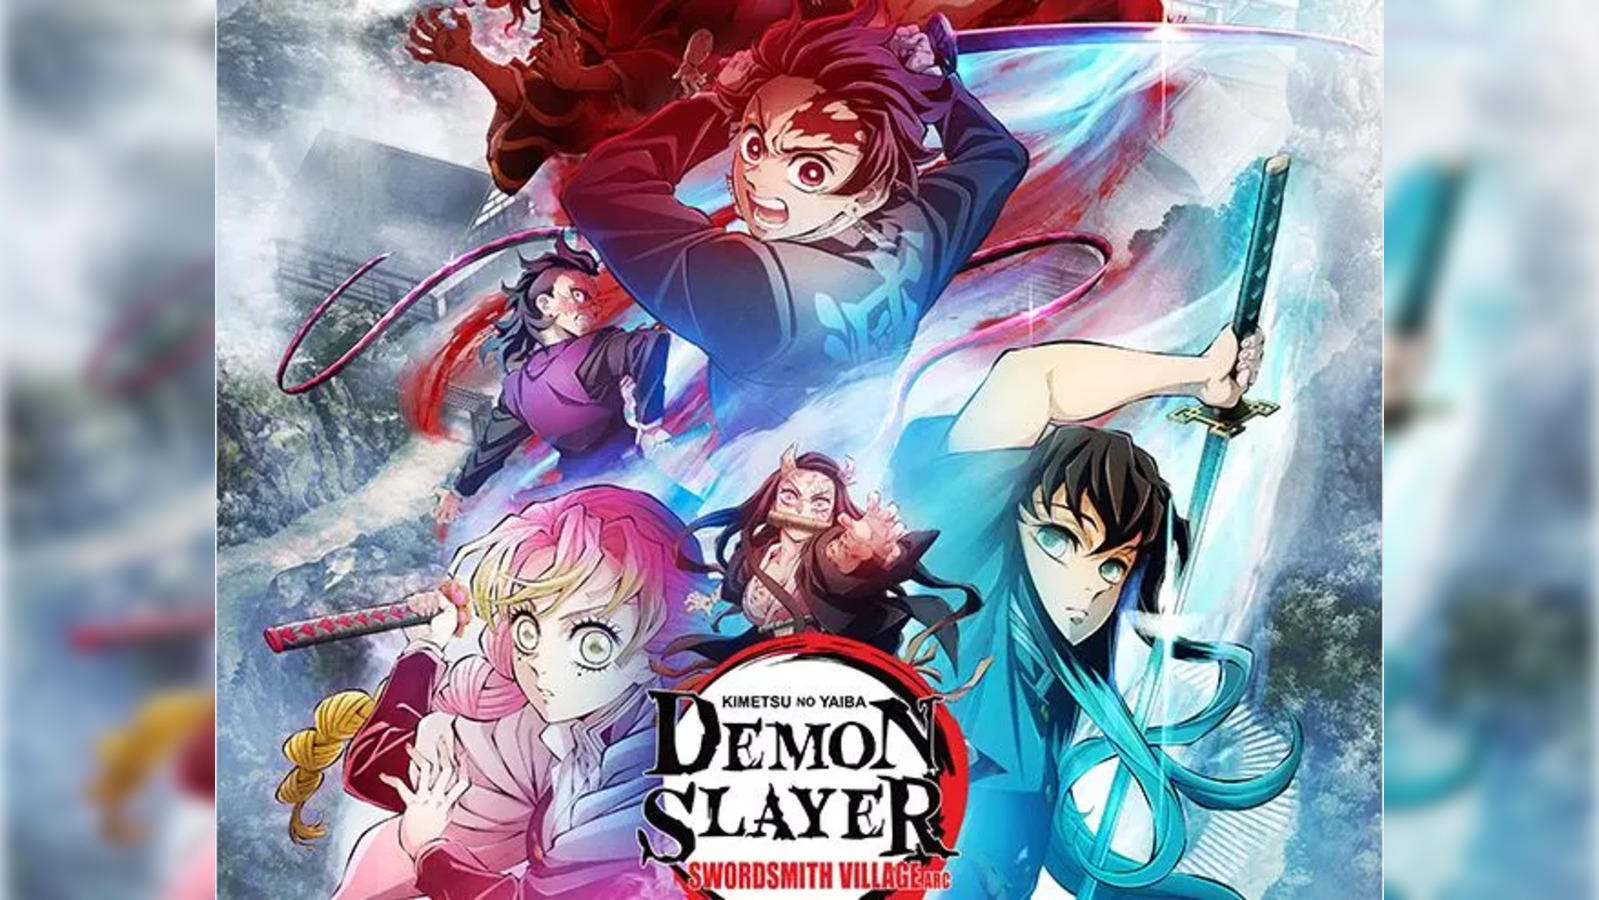 When is 'Demon Slayer' season 4 coming out?